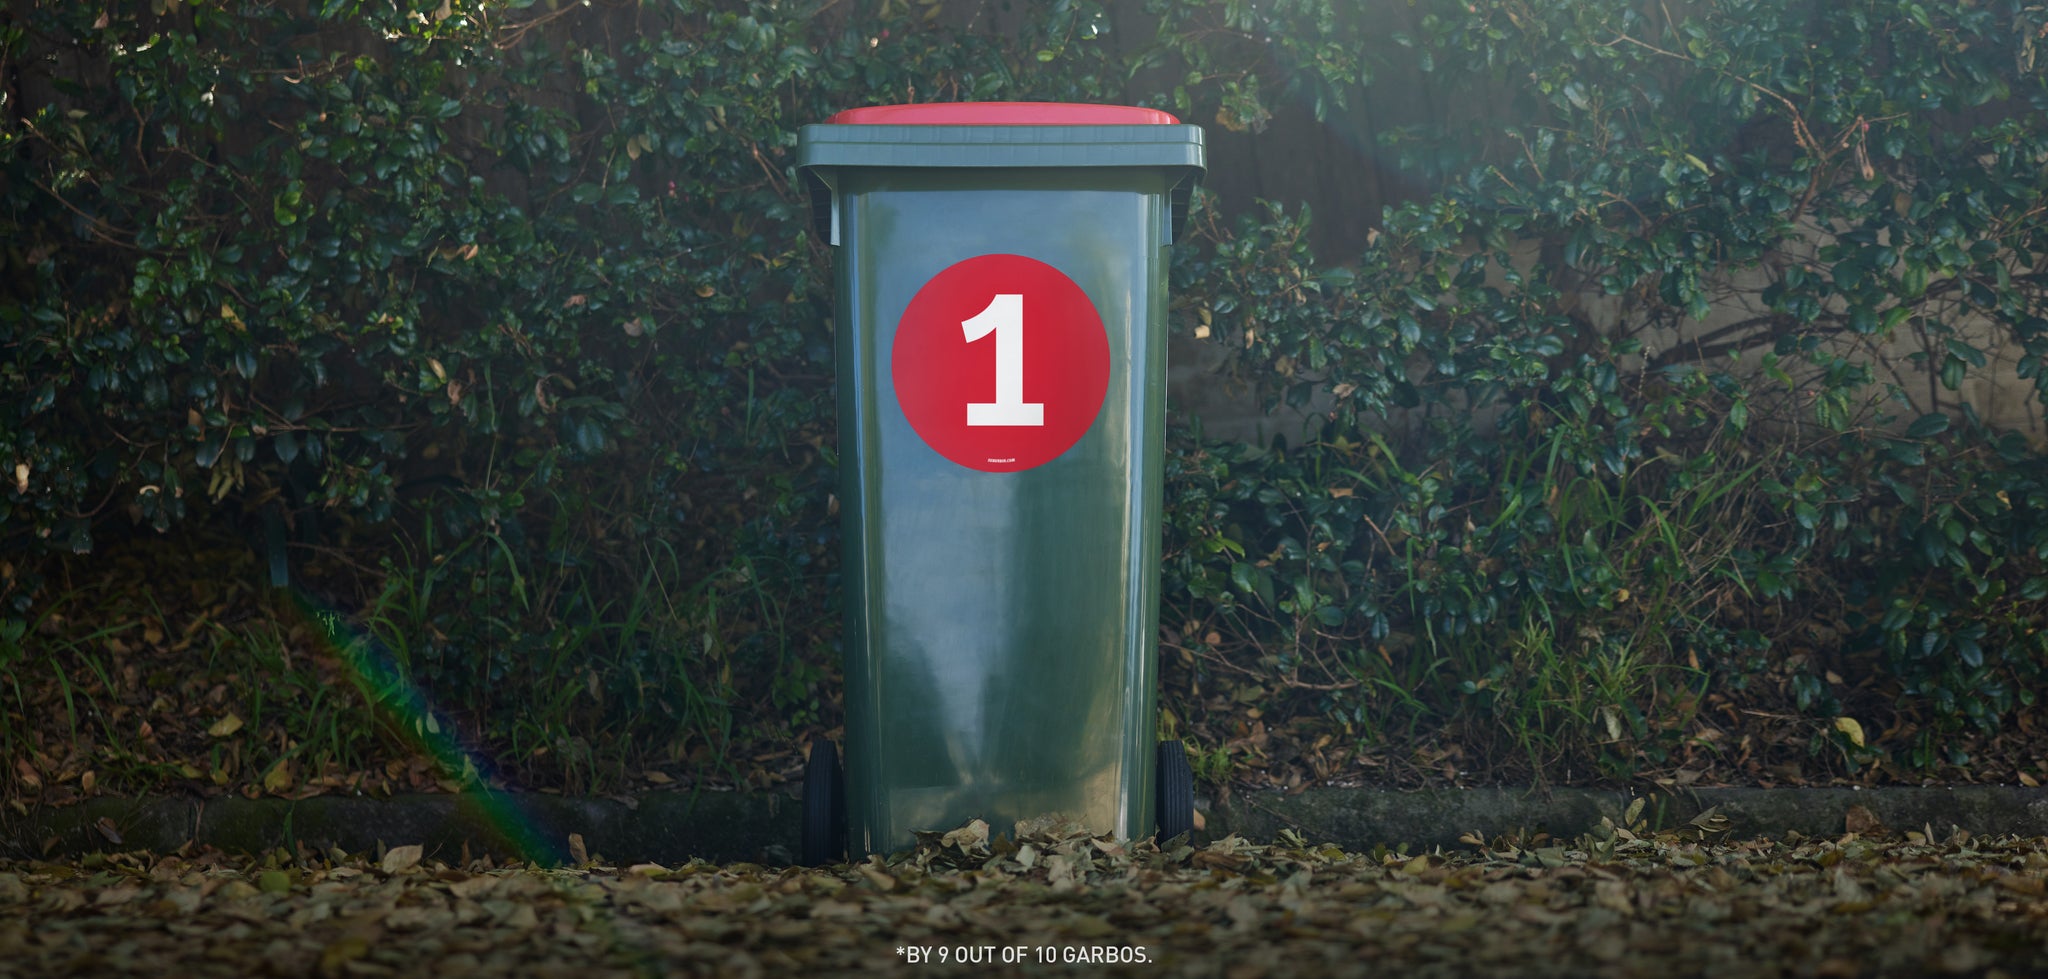  Red wheelie bin in leaflitter with green hedge behind with a red number 1 Suburbin sticker.